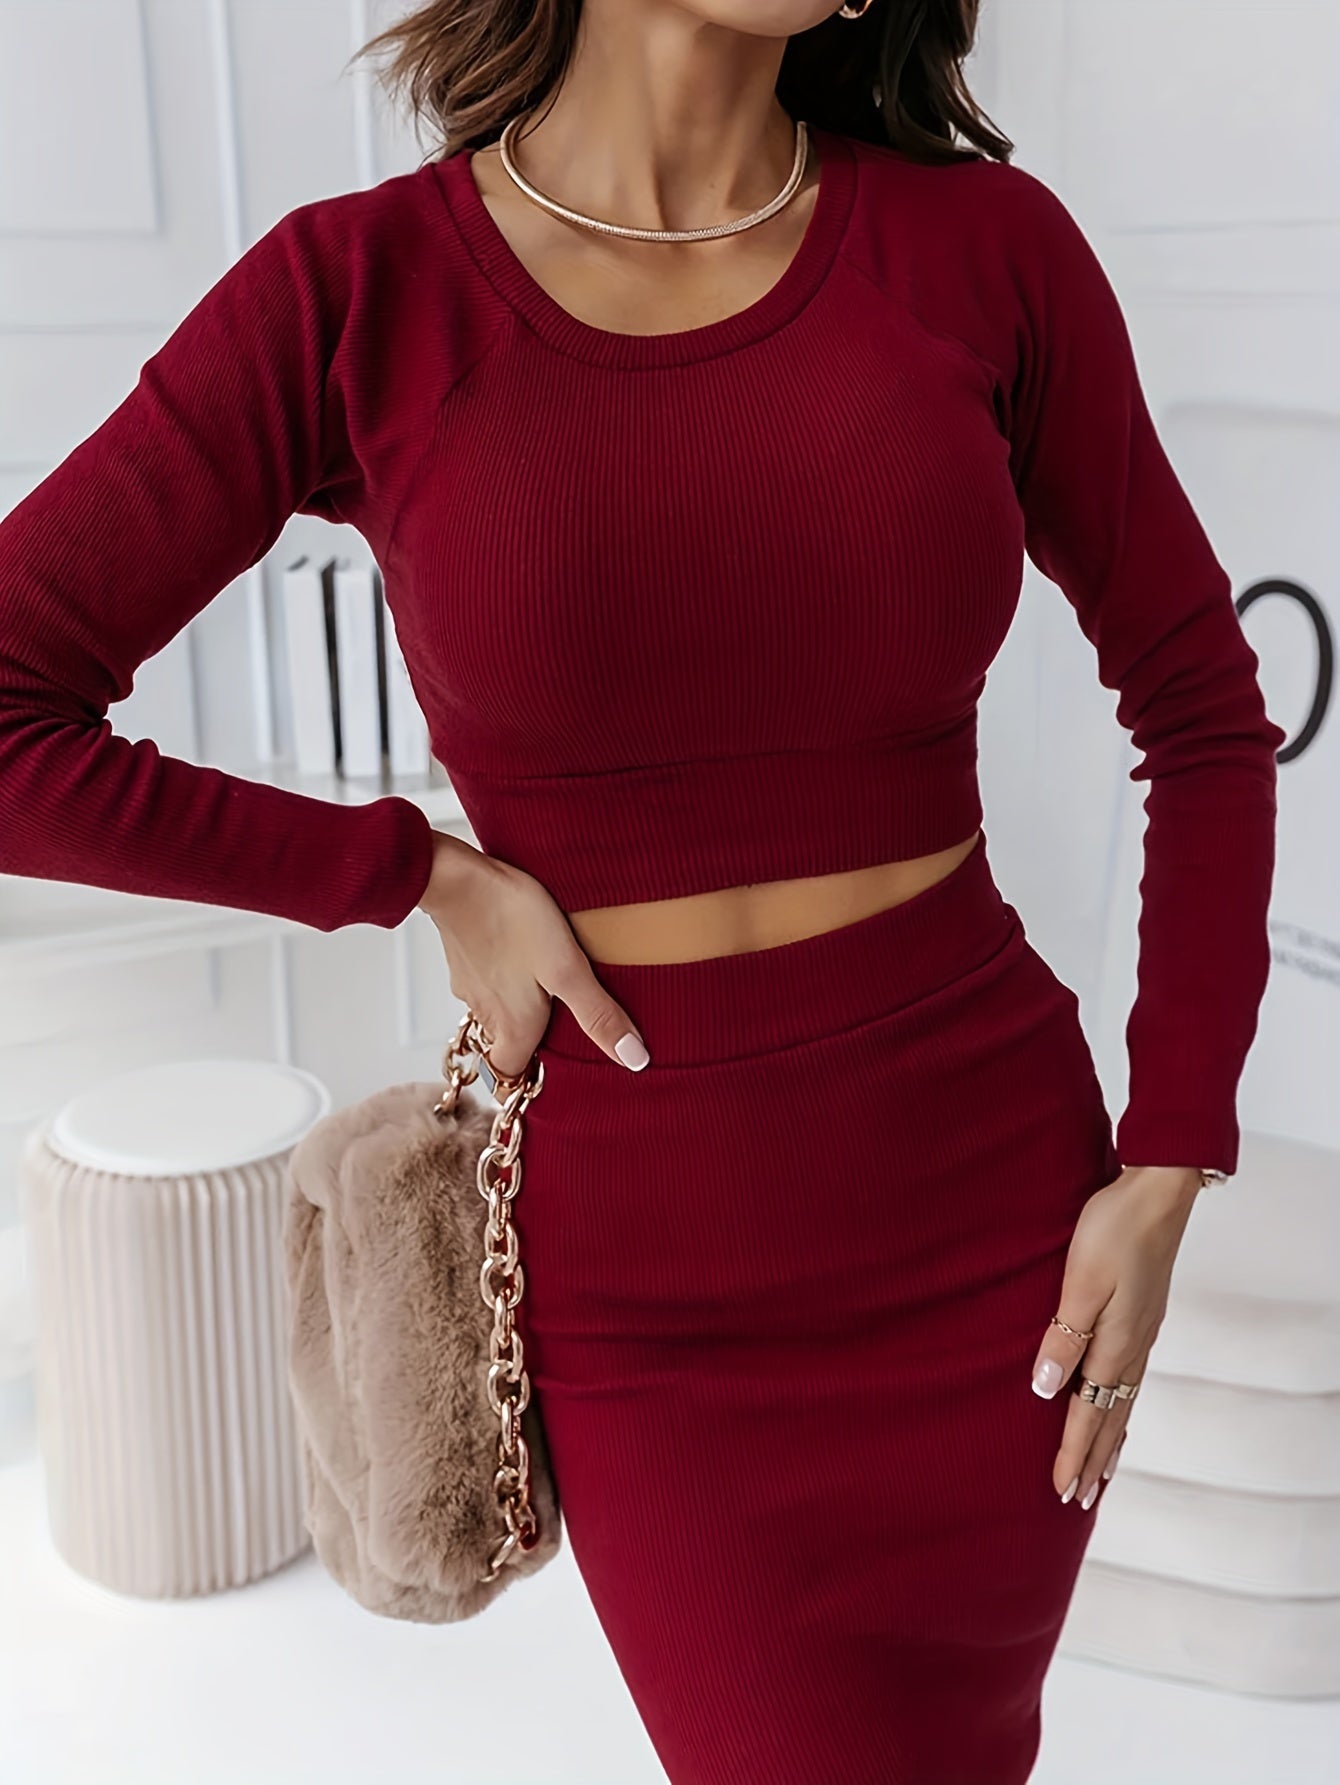 Casual Solid Two-piece Set, Crew Neck Long Sleeve Crop Top & High Waist Skirt Outfits, Women's Clothing